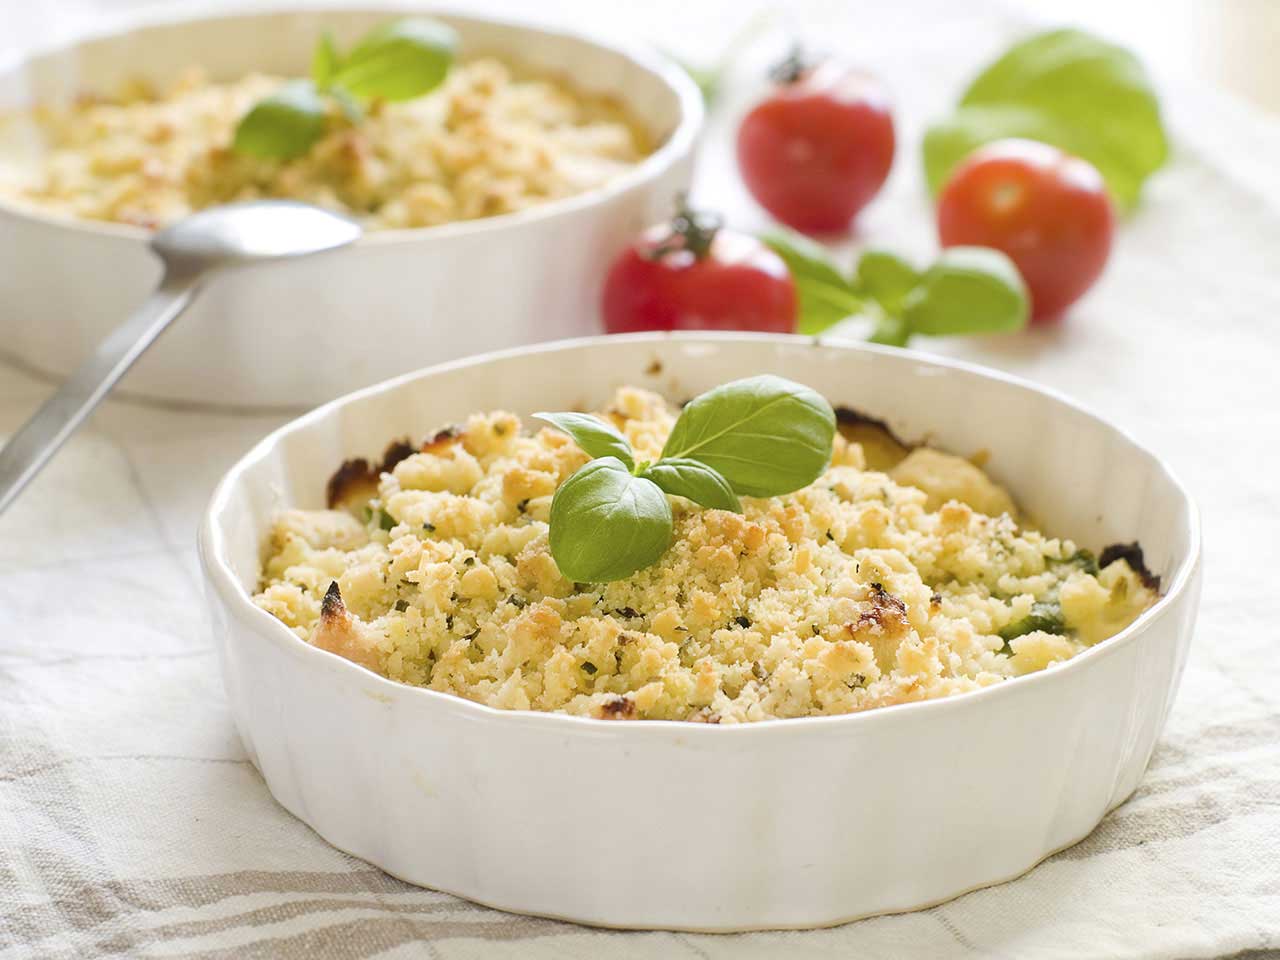 Savoury crumble topped dishes